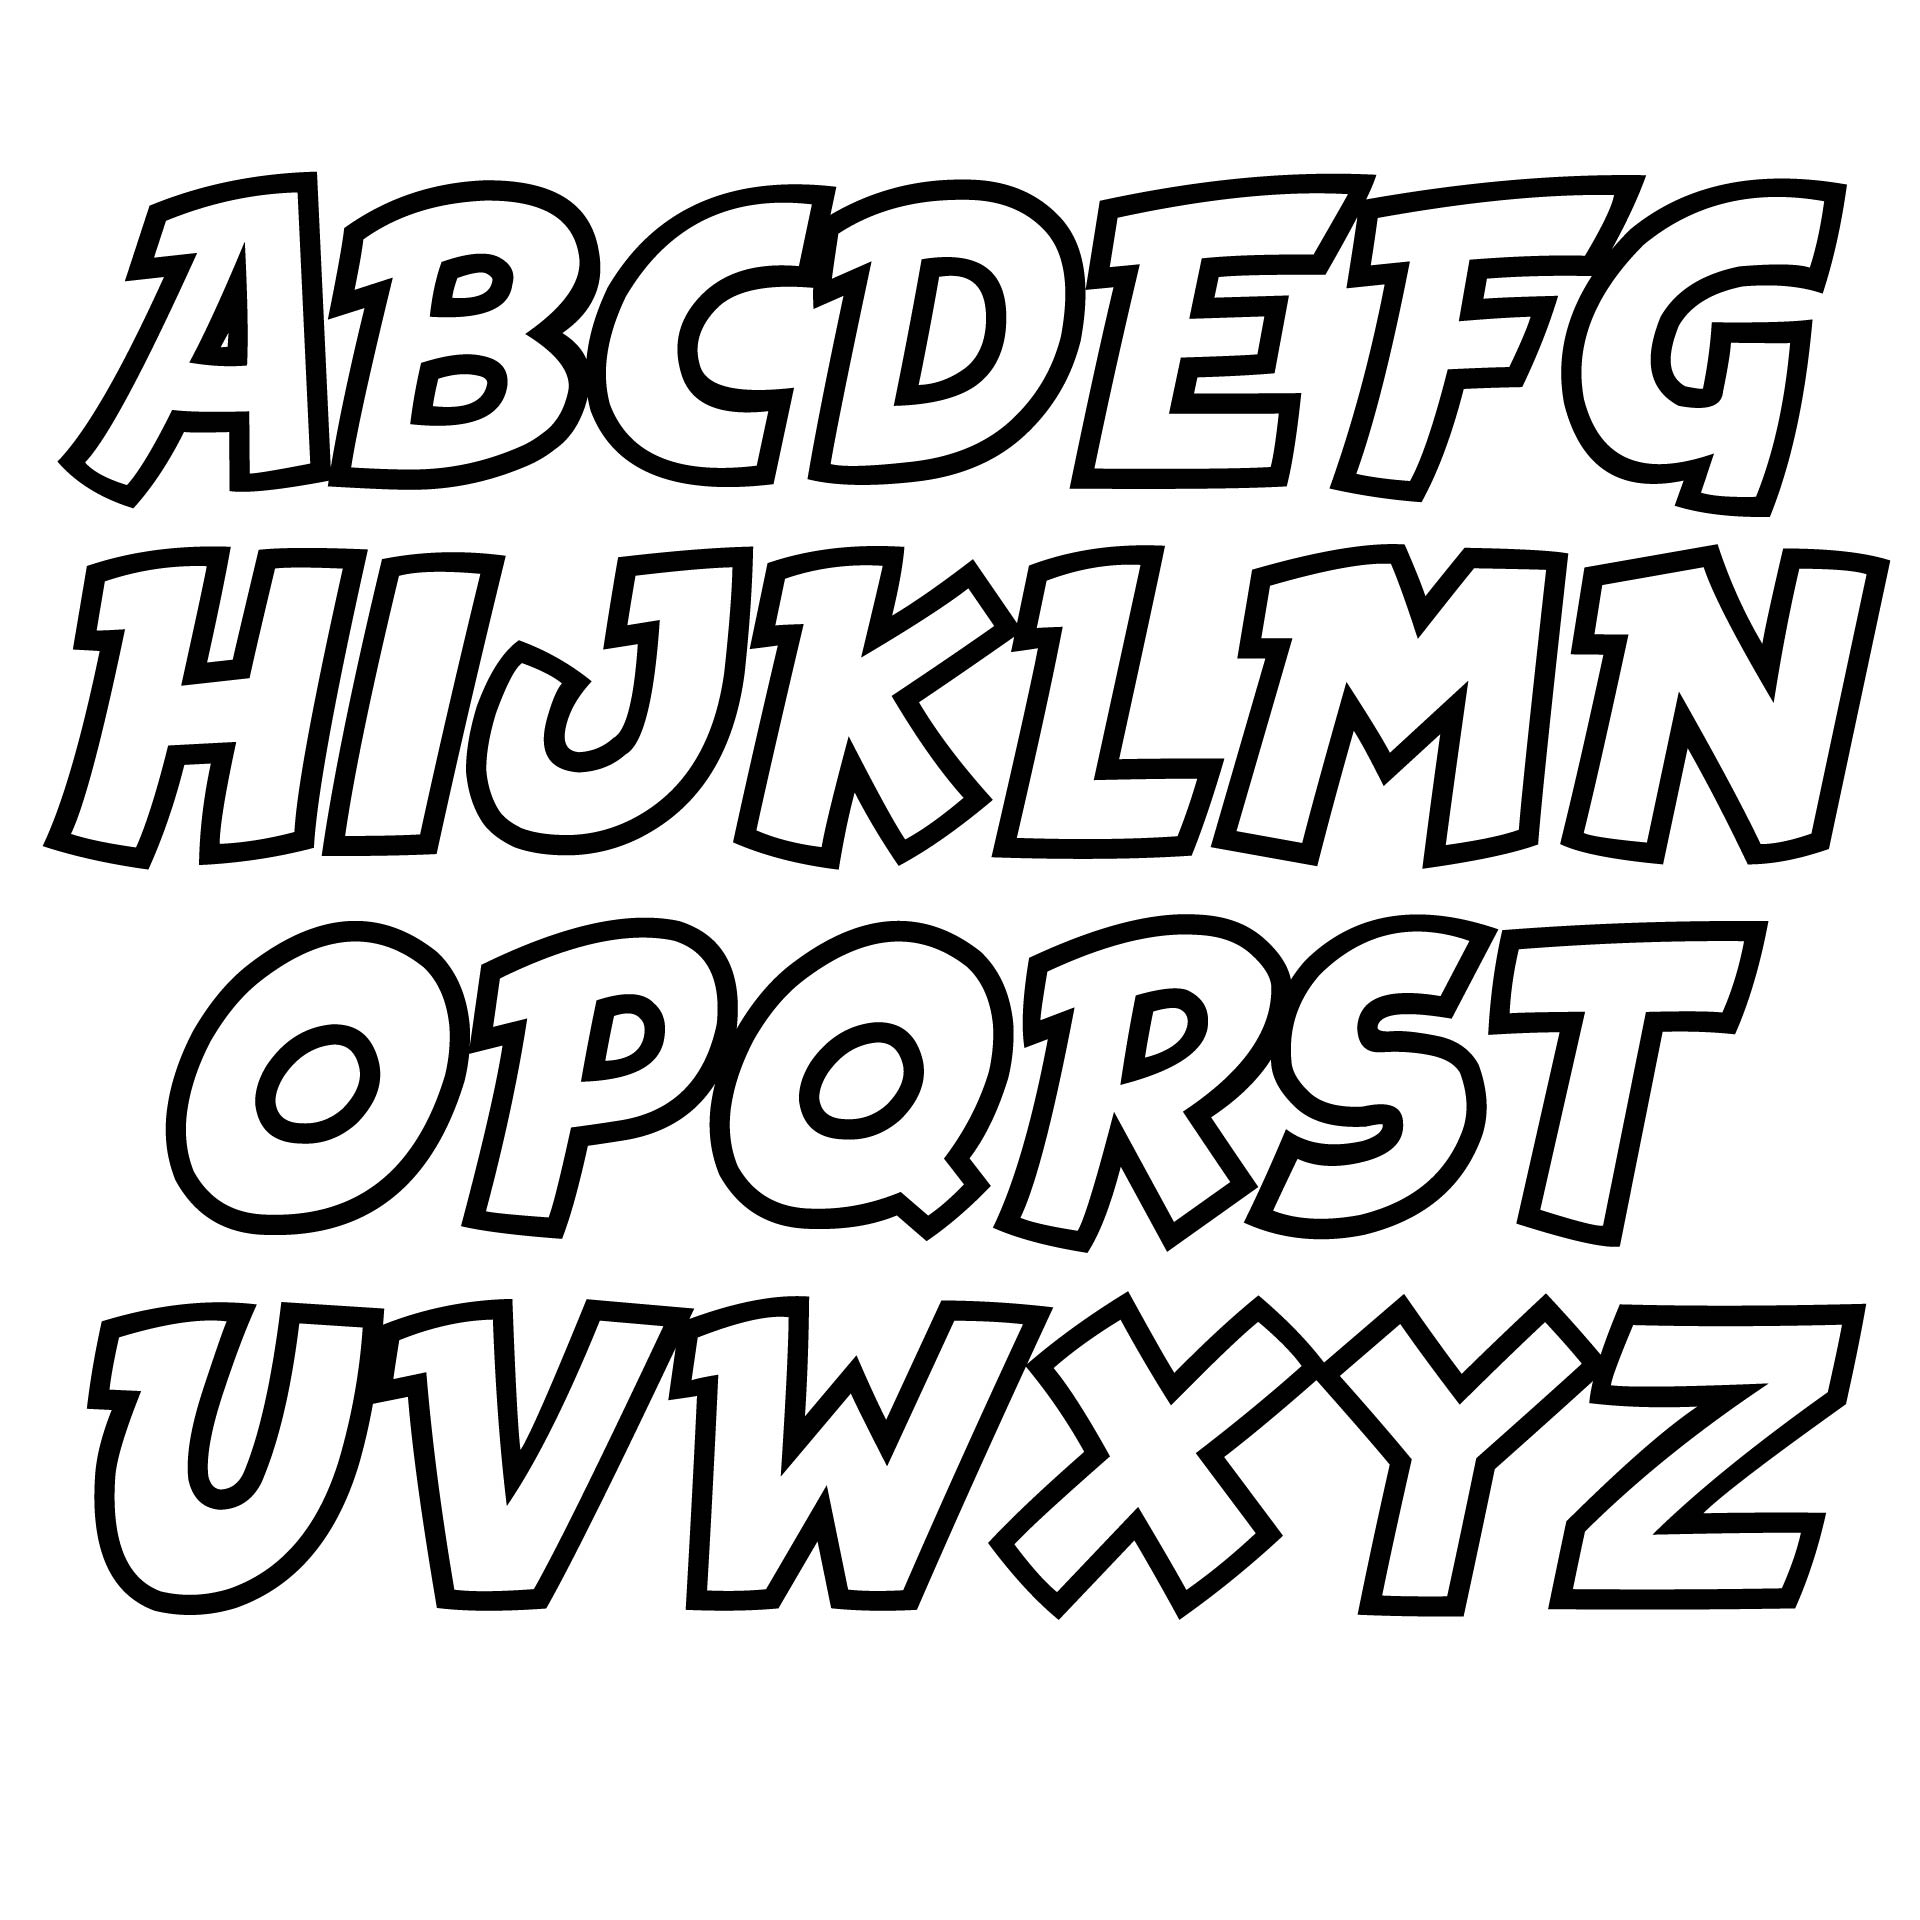 free-printable-block-letter-templates-10-best-free-printable-cut-out